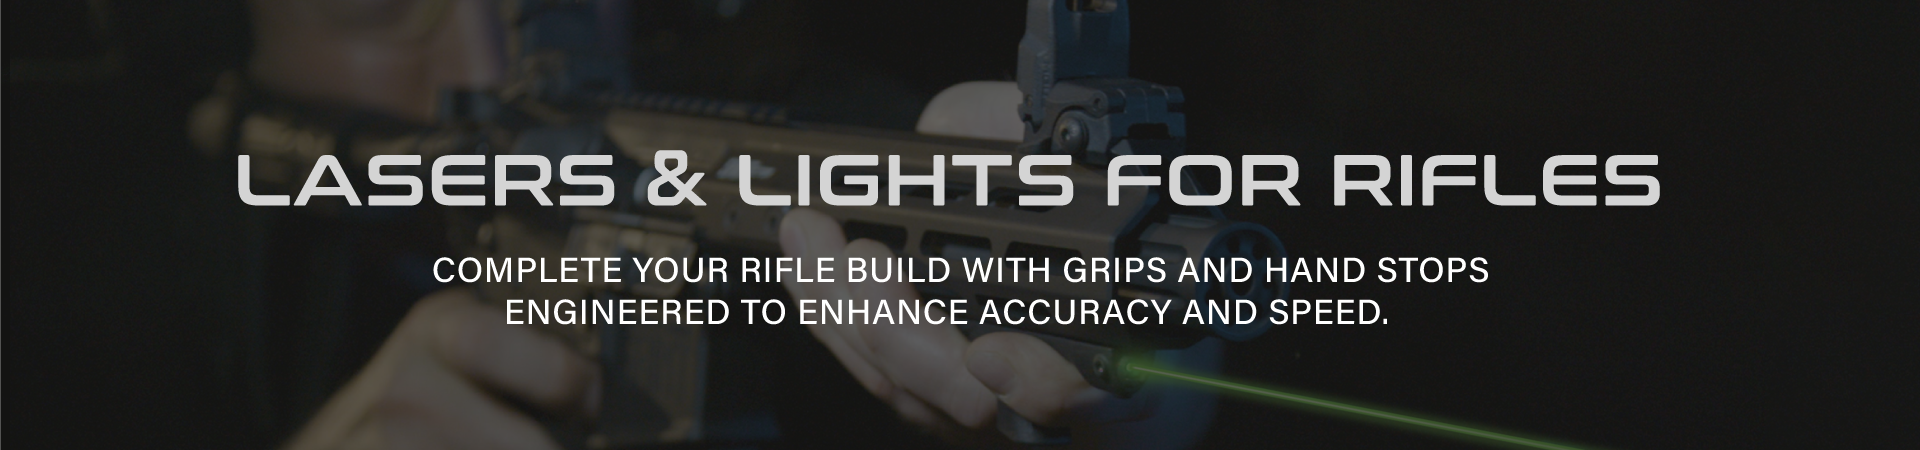 LASERS AND LIGHTS FOR RIFLES COMPLETE YOUR RIFLE BUILDS WITH GRIPS AND STOPS ENGINEERED TO ENHANCED ACCURACY AND SPEED